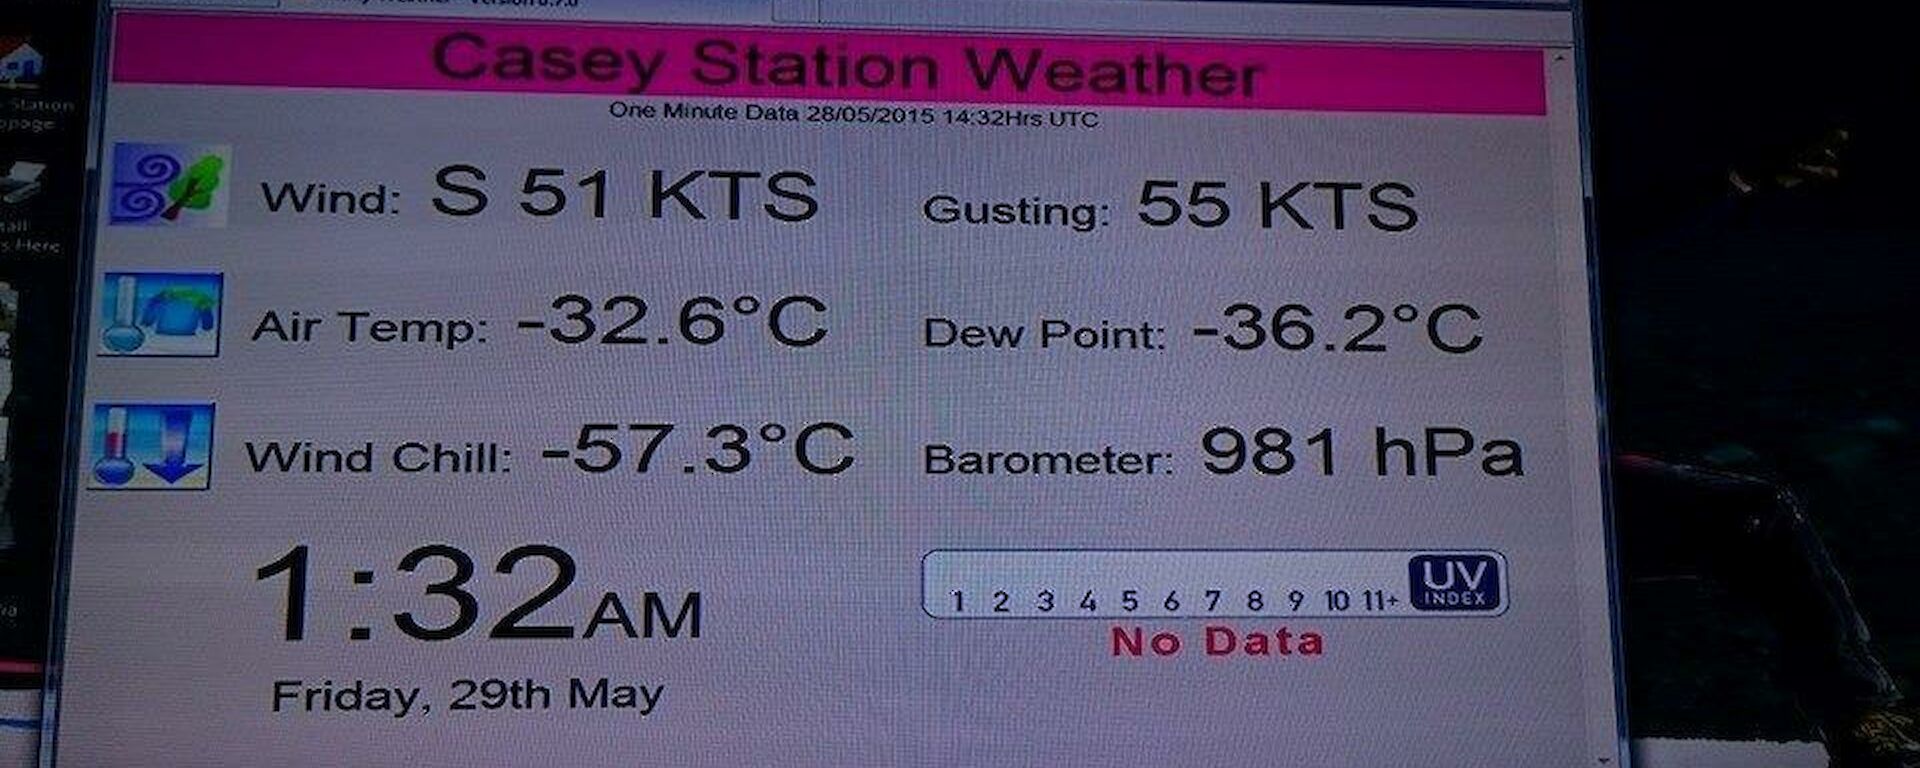 Casey weather info display